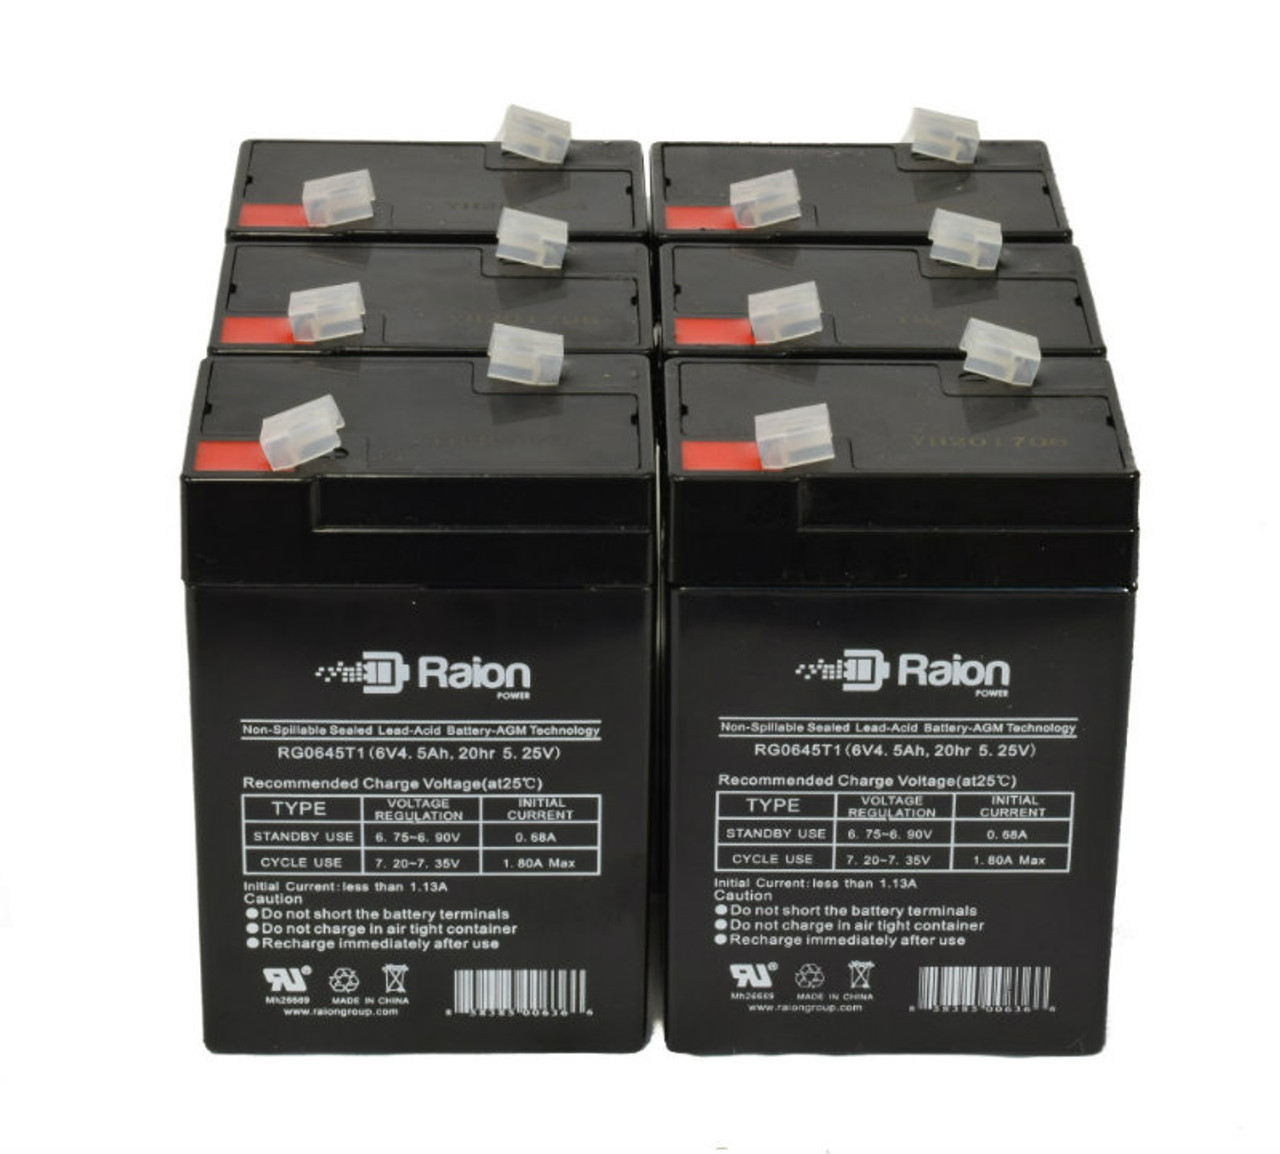 Raion Power RG0645T1 6V 4.5Ah Replacement Medical Equipment Battery for Nellcor NPB 190 - 6 Pack